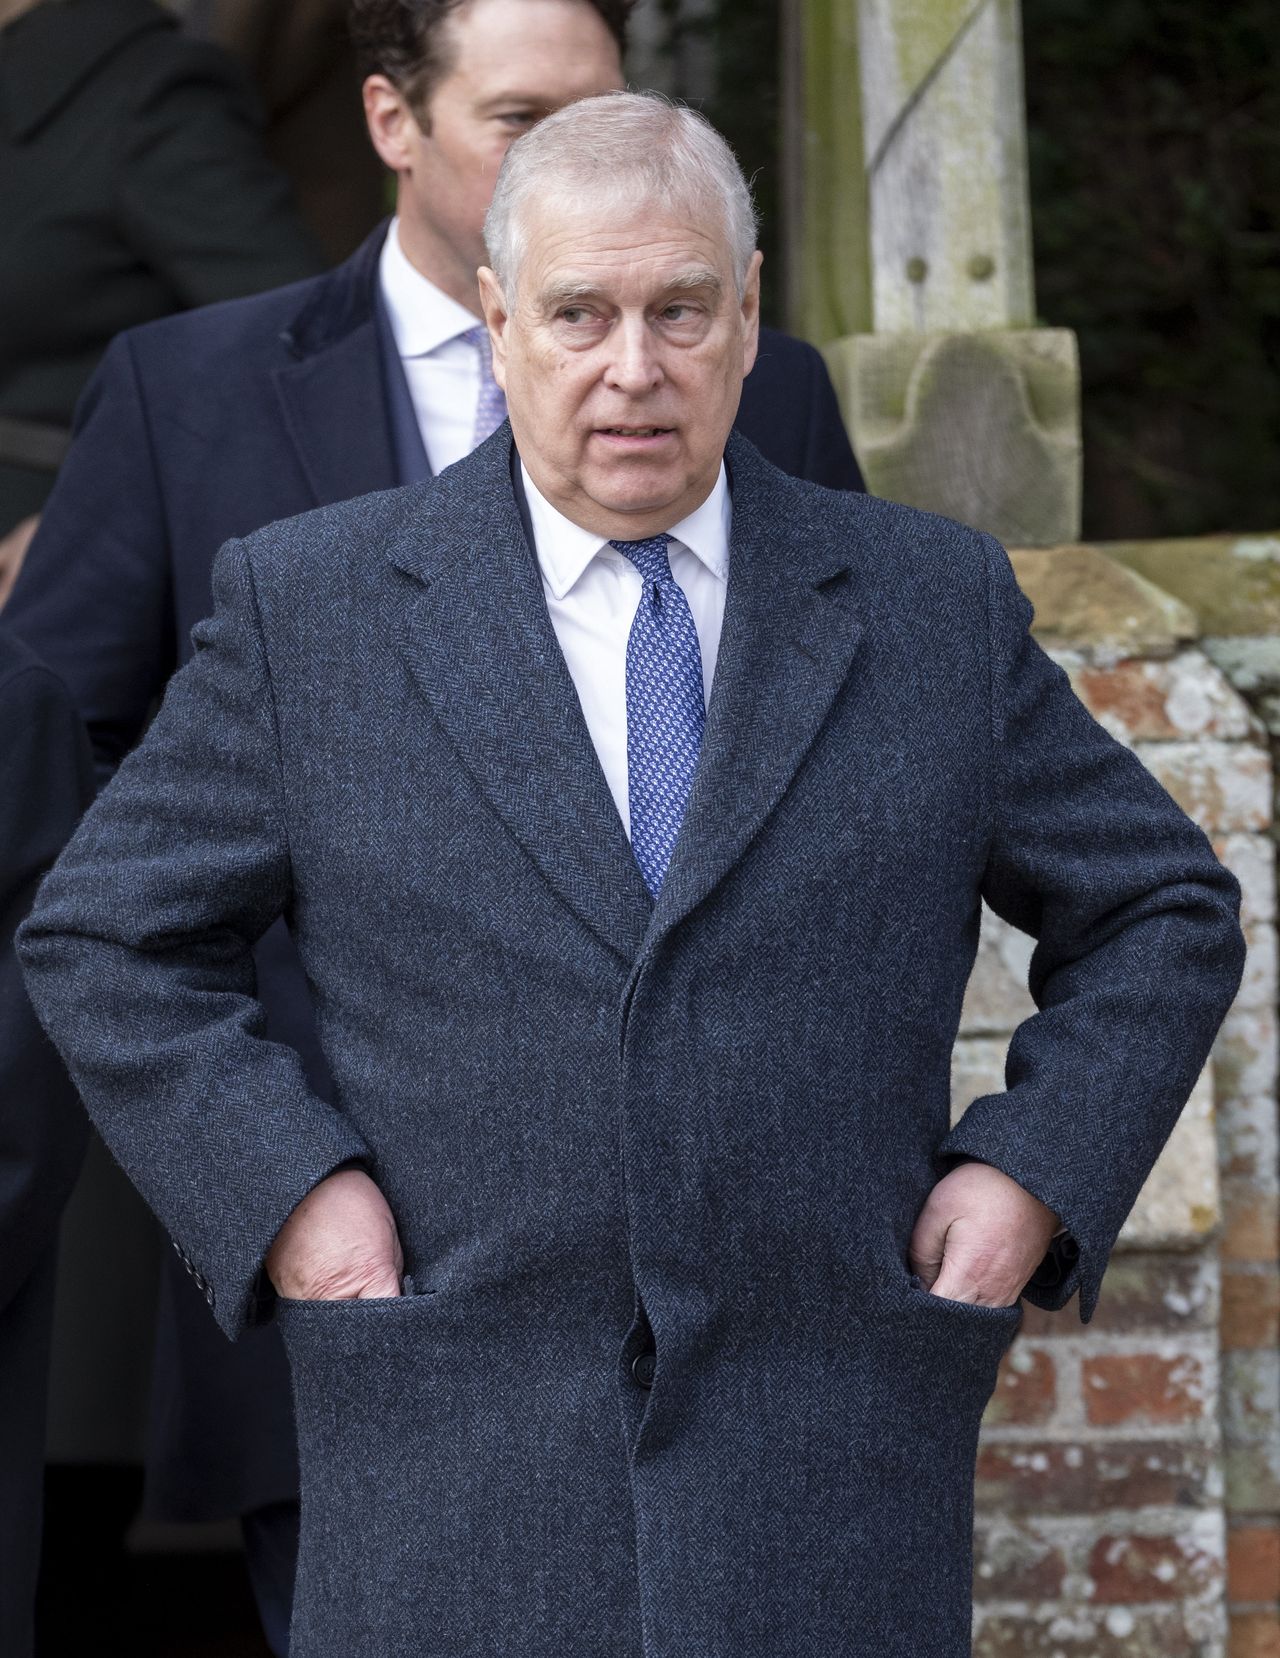 Prince Andrew reported to the police!